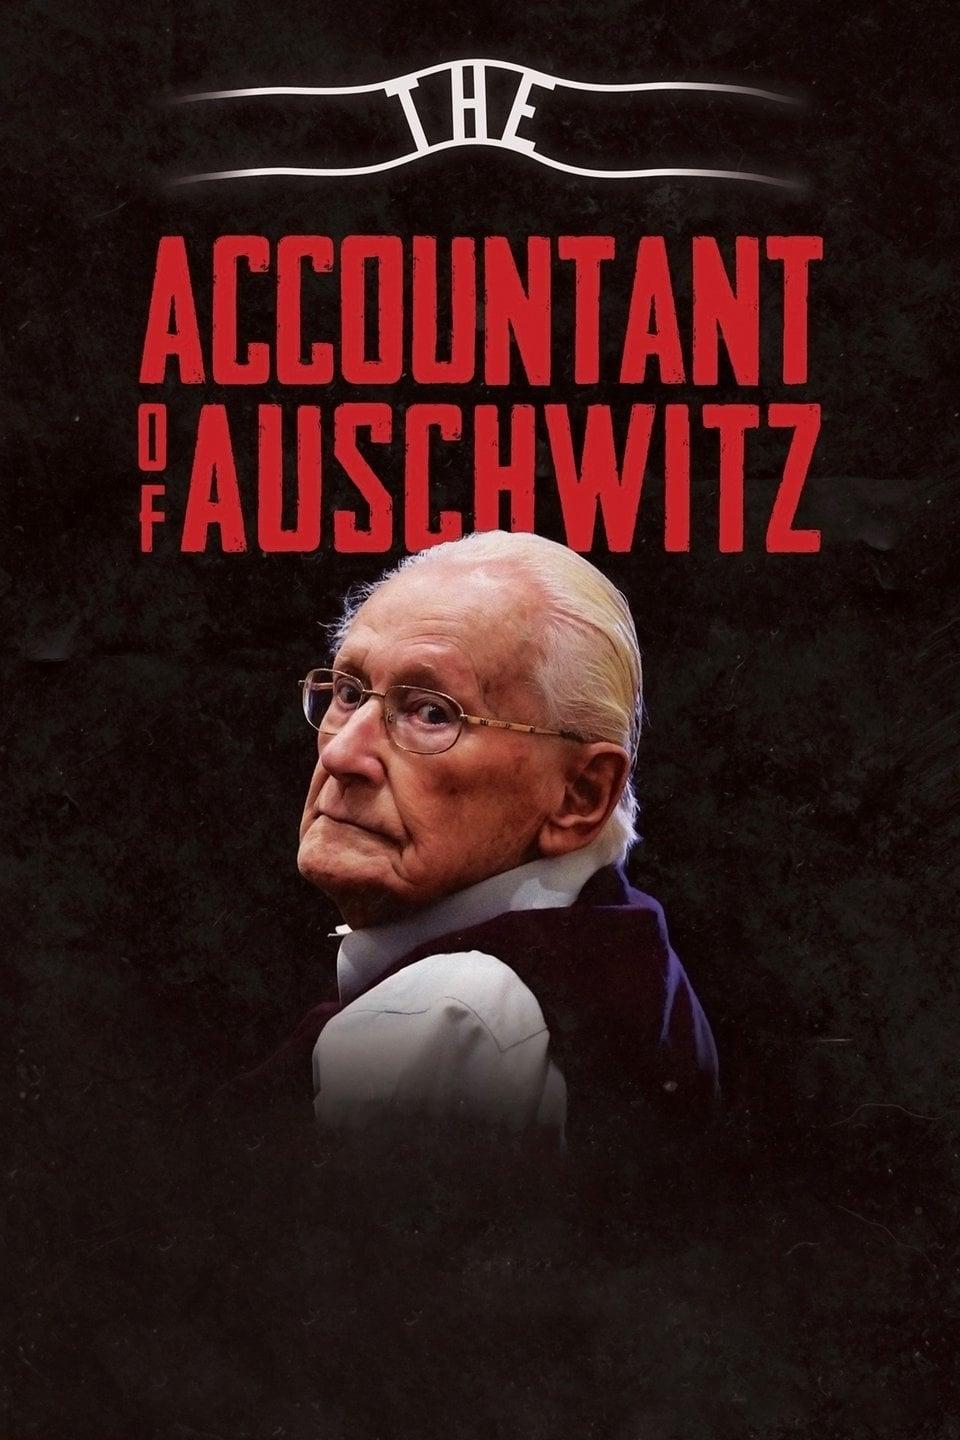 The Accountant of Auschwitz poster